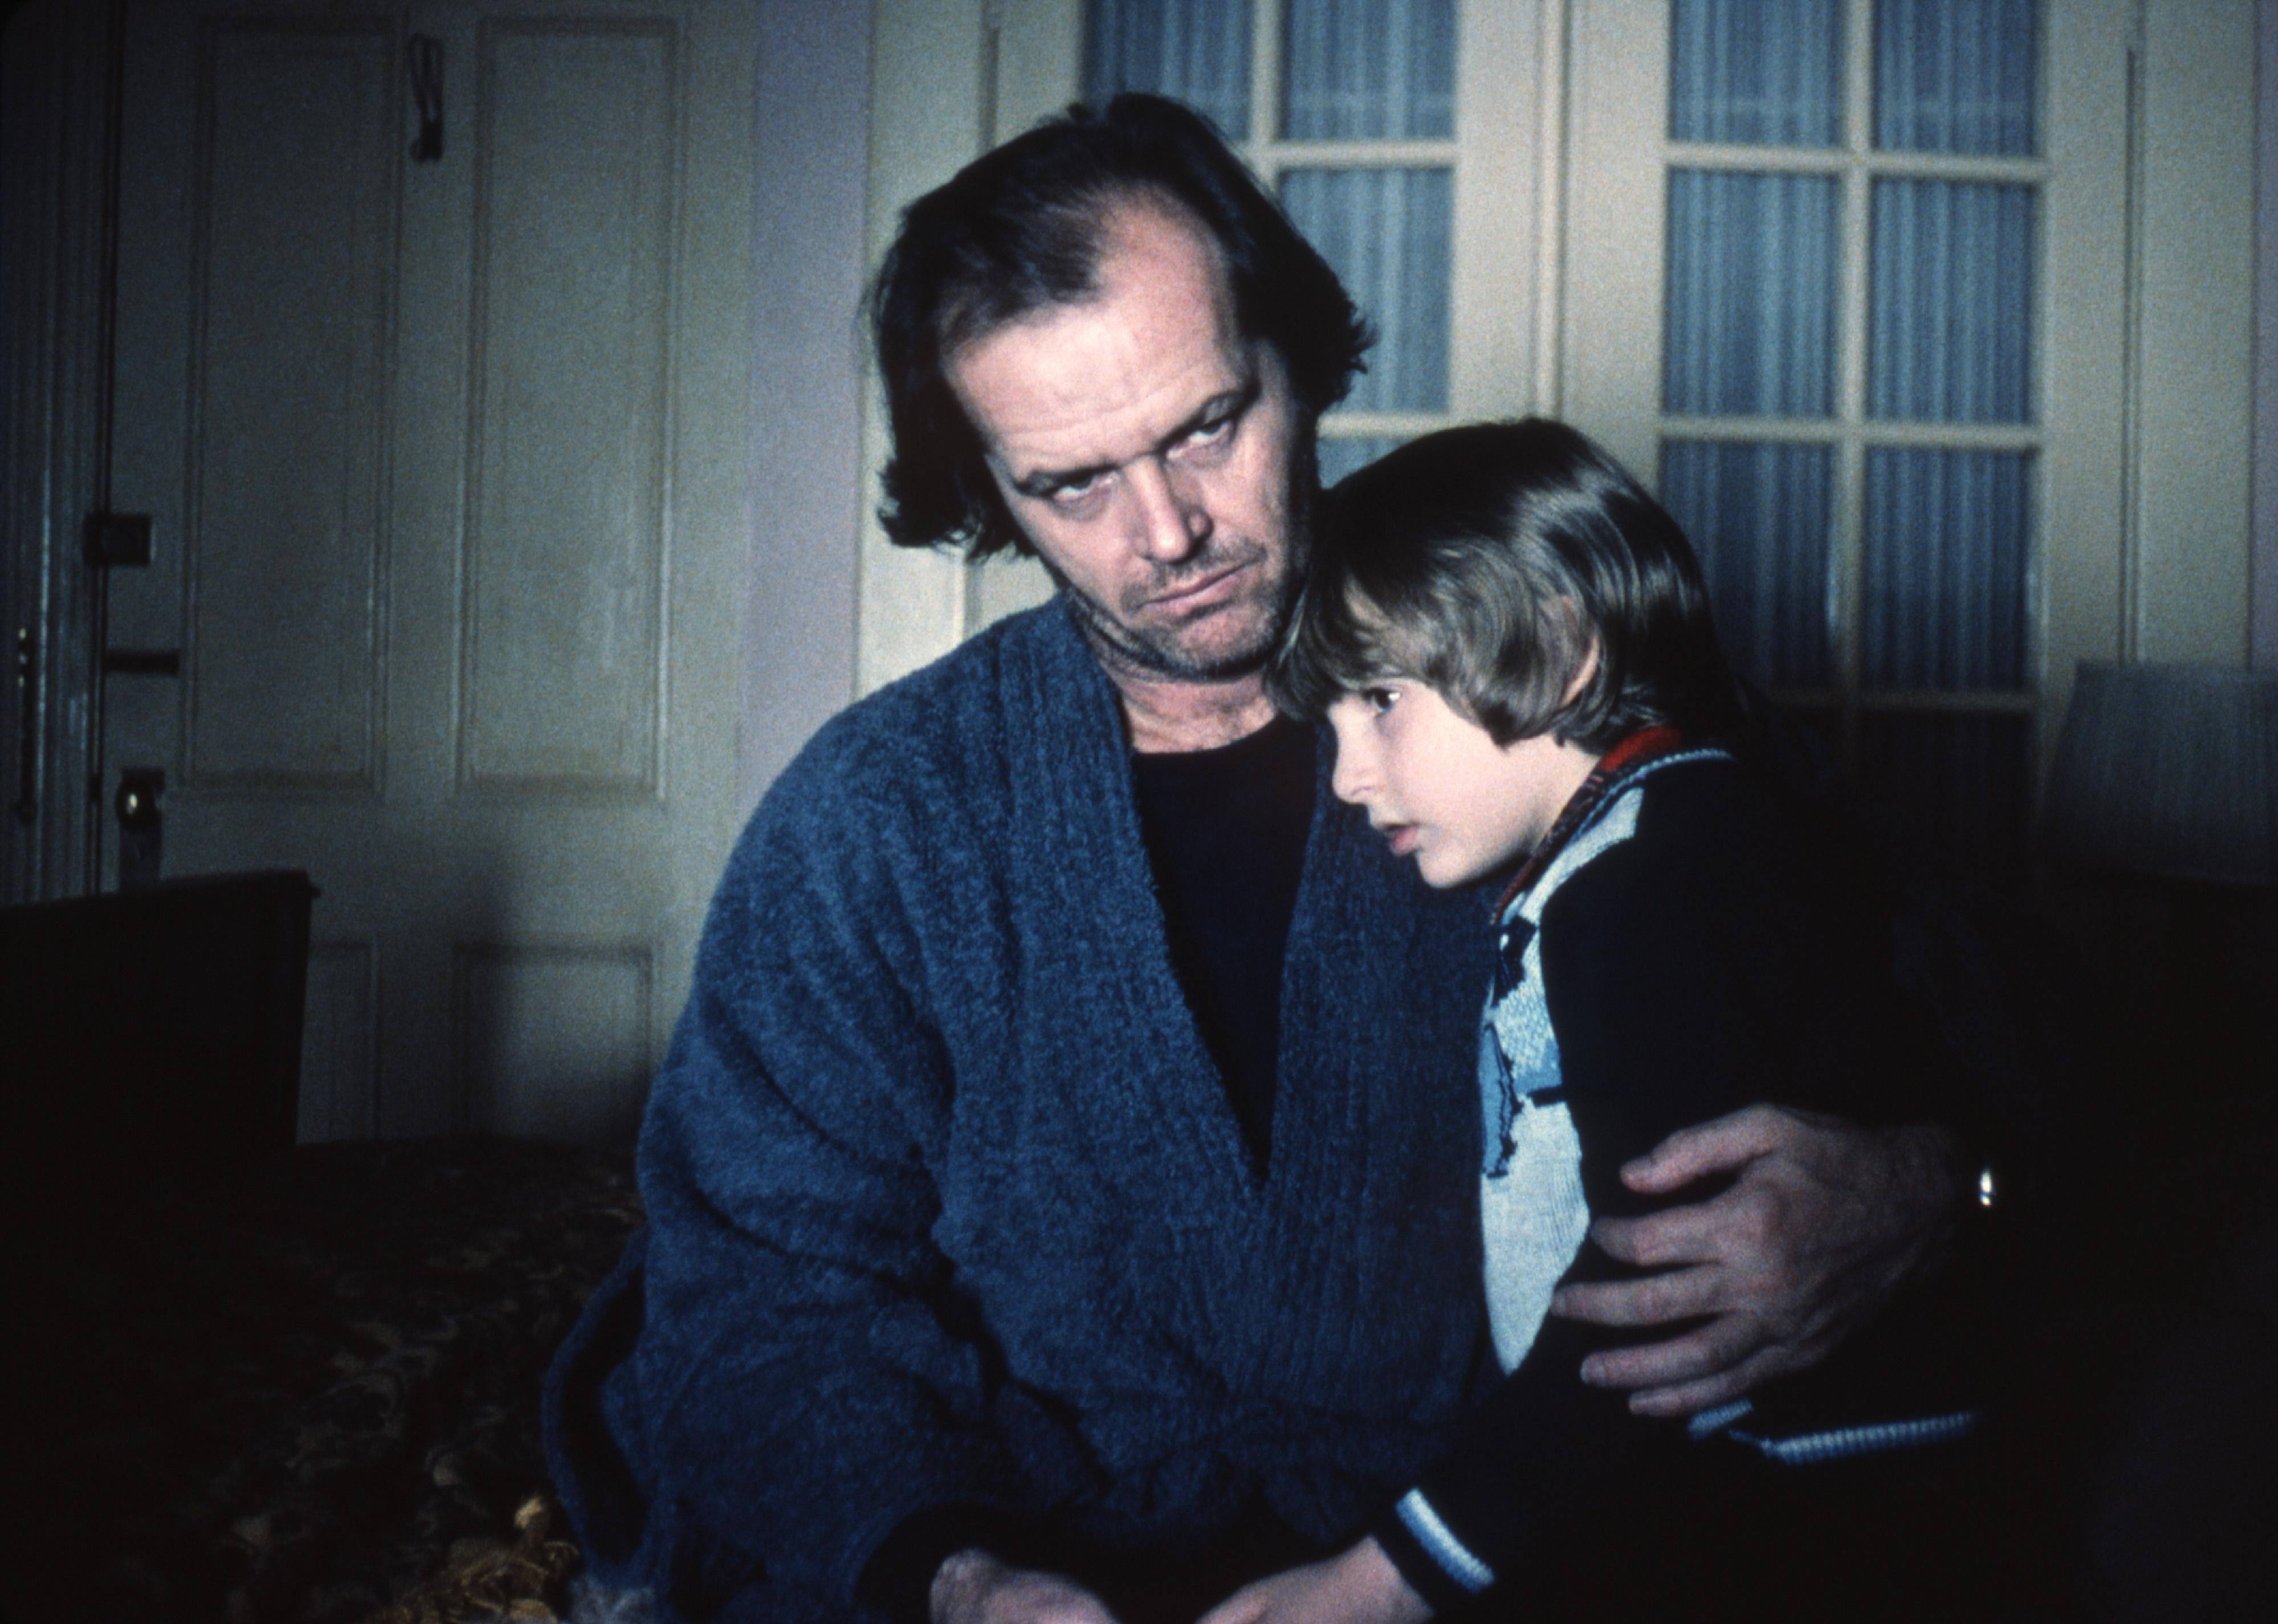 Jack Nicholson and Danny Lloyd on the set of The Shining.